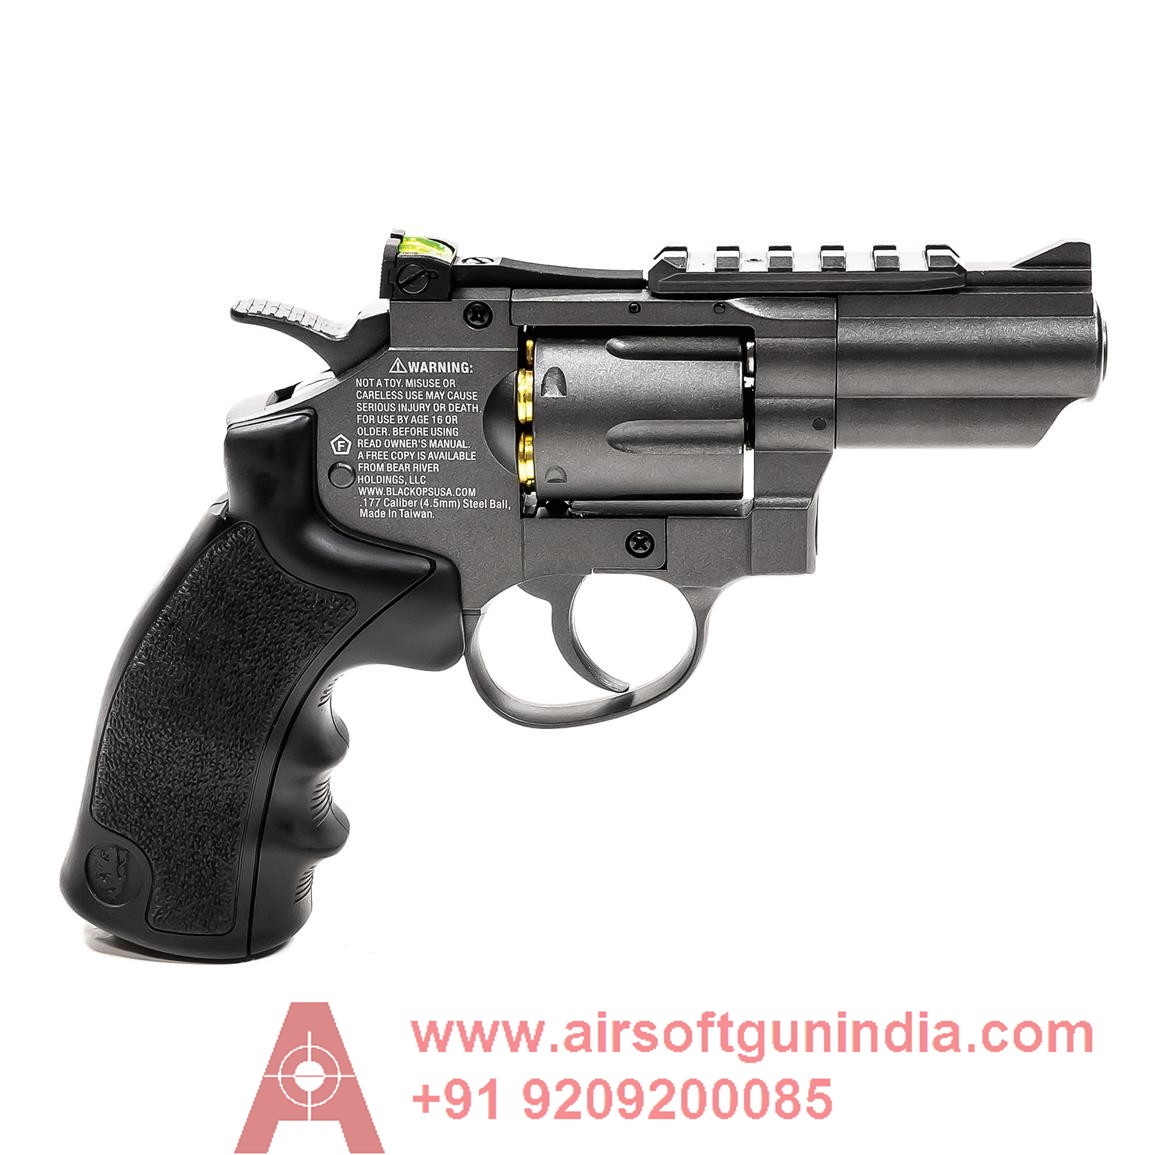 Black Ops Metal Co2 Bb Revolver By Airsoft Gun India